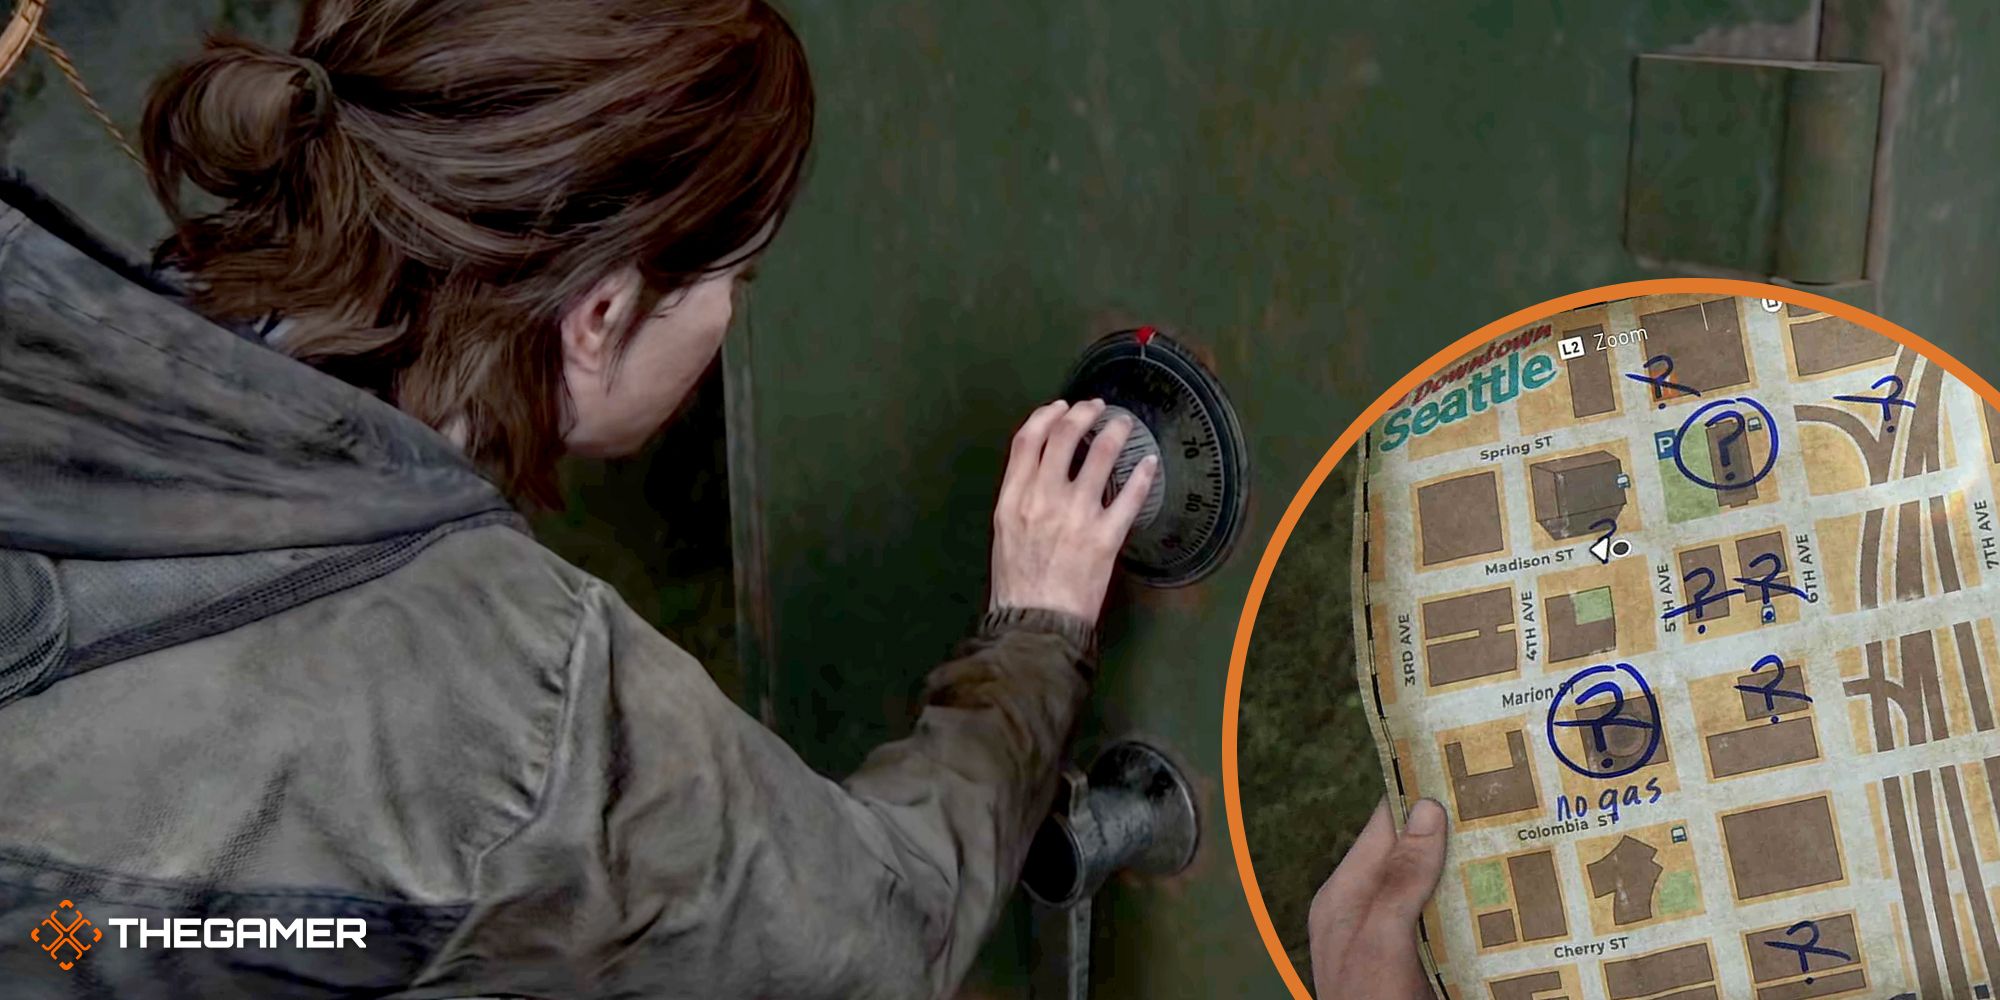 Last of Us 2' Safe Codes: Combos for Big Win, Hillcrest, and 12 more safes